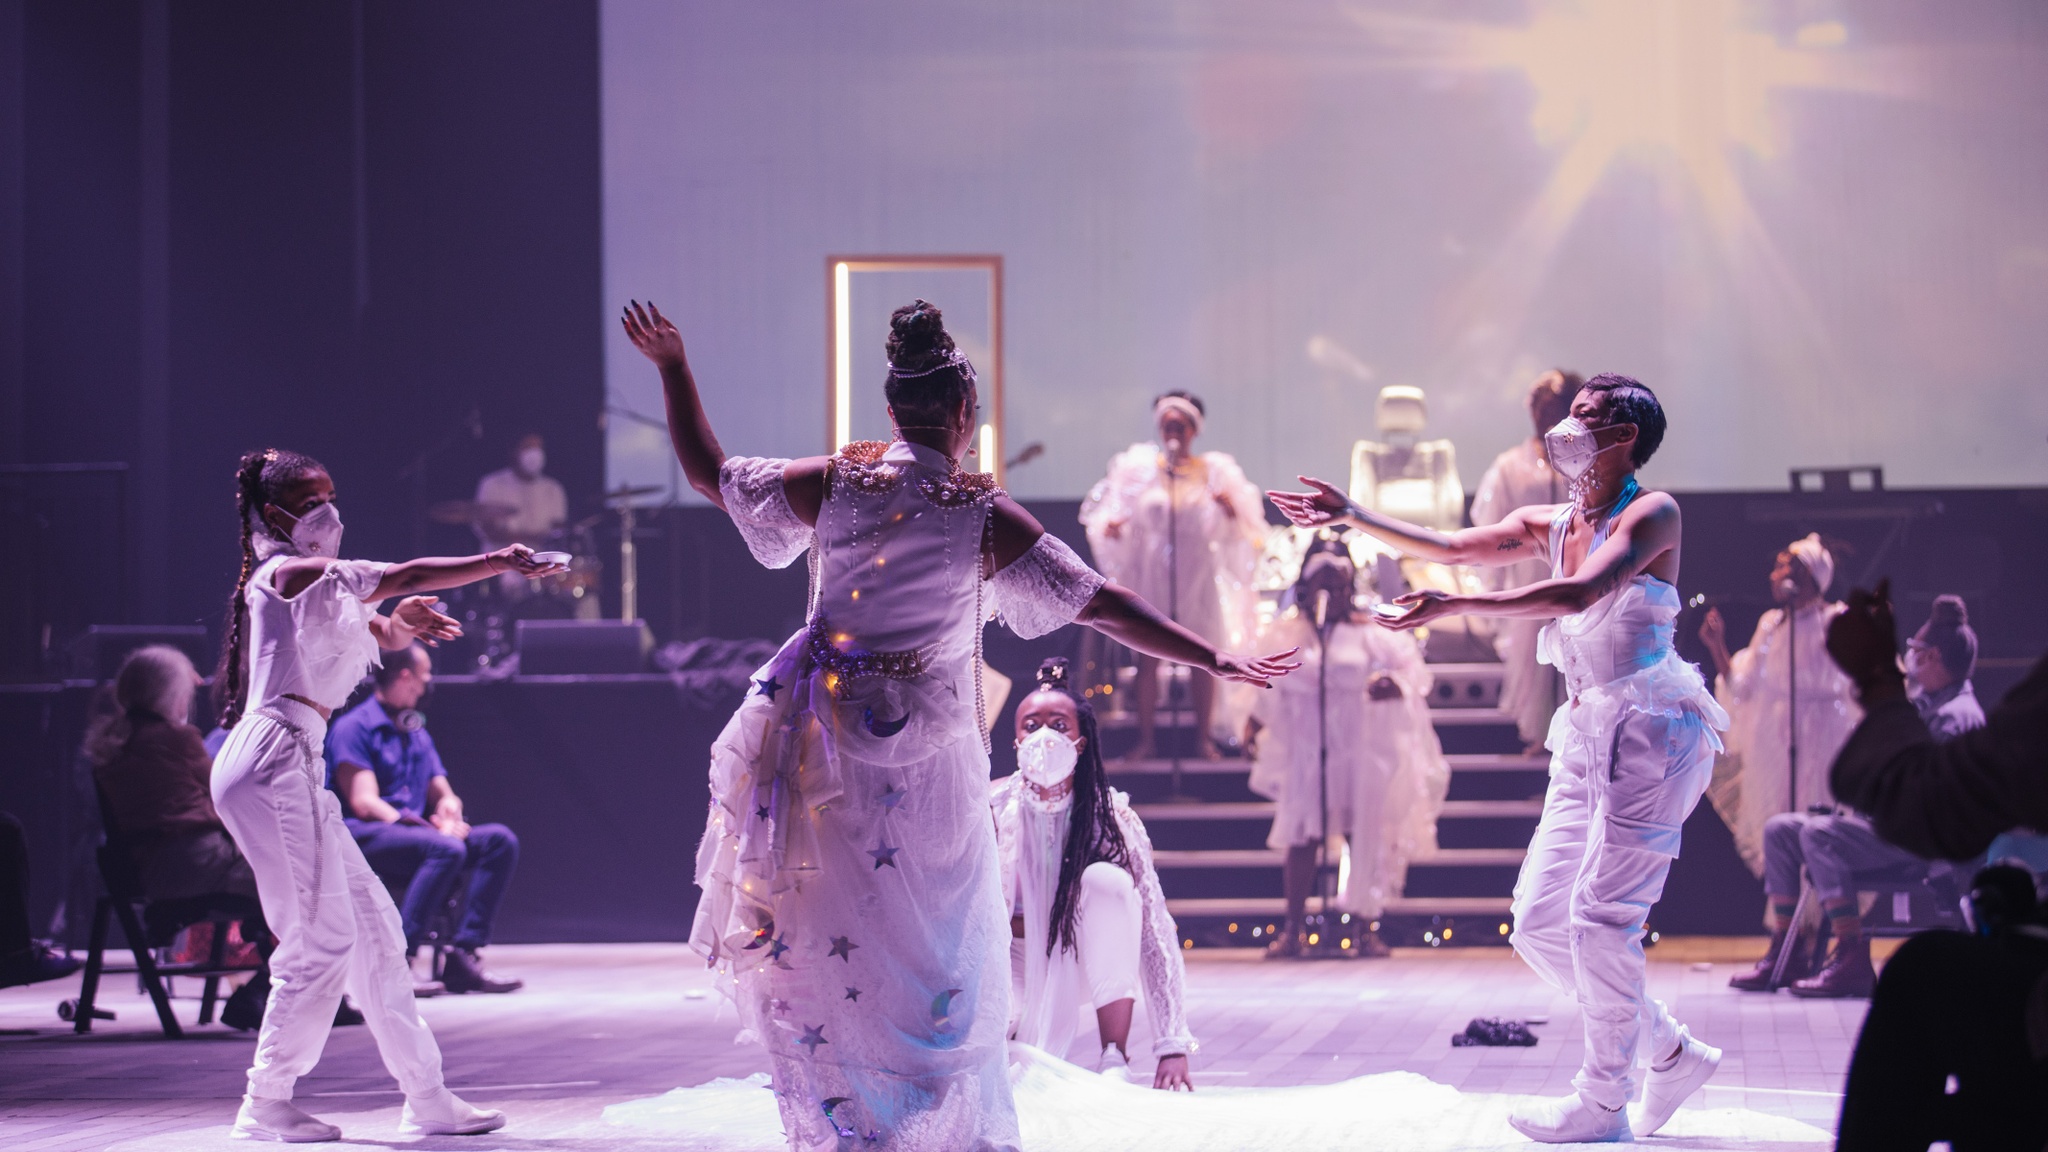 Four performers dressed all in white stand in a circle at the center of a performance space. In the background, additional performers in white stand on stairs leading up to a stage. The set and costume design include small twinkling lights evoking a cosmic scene. 